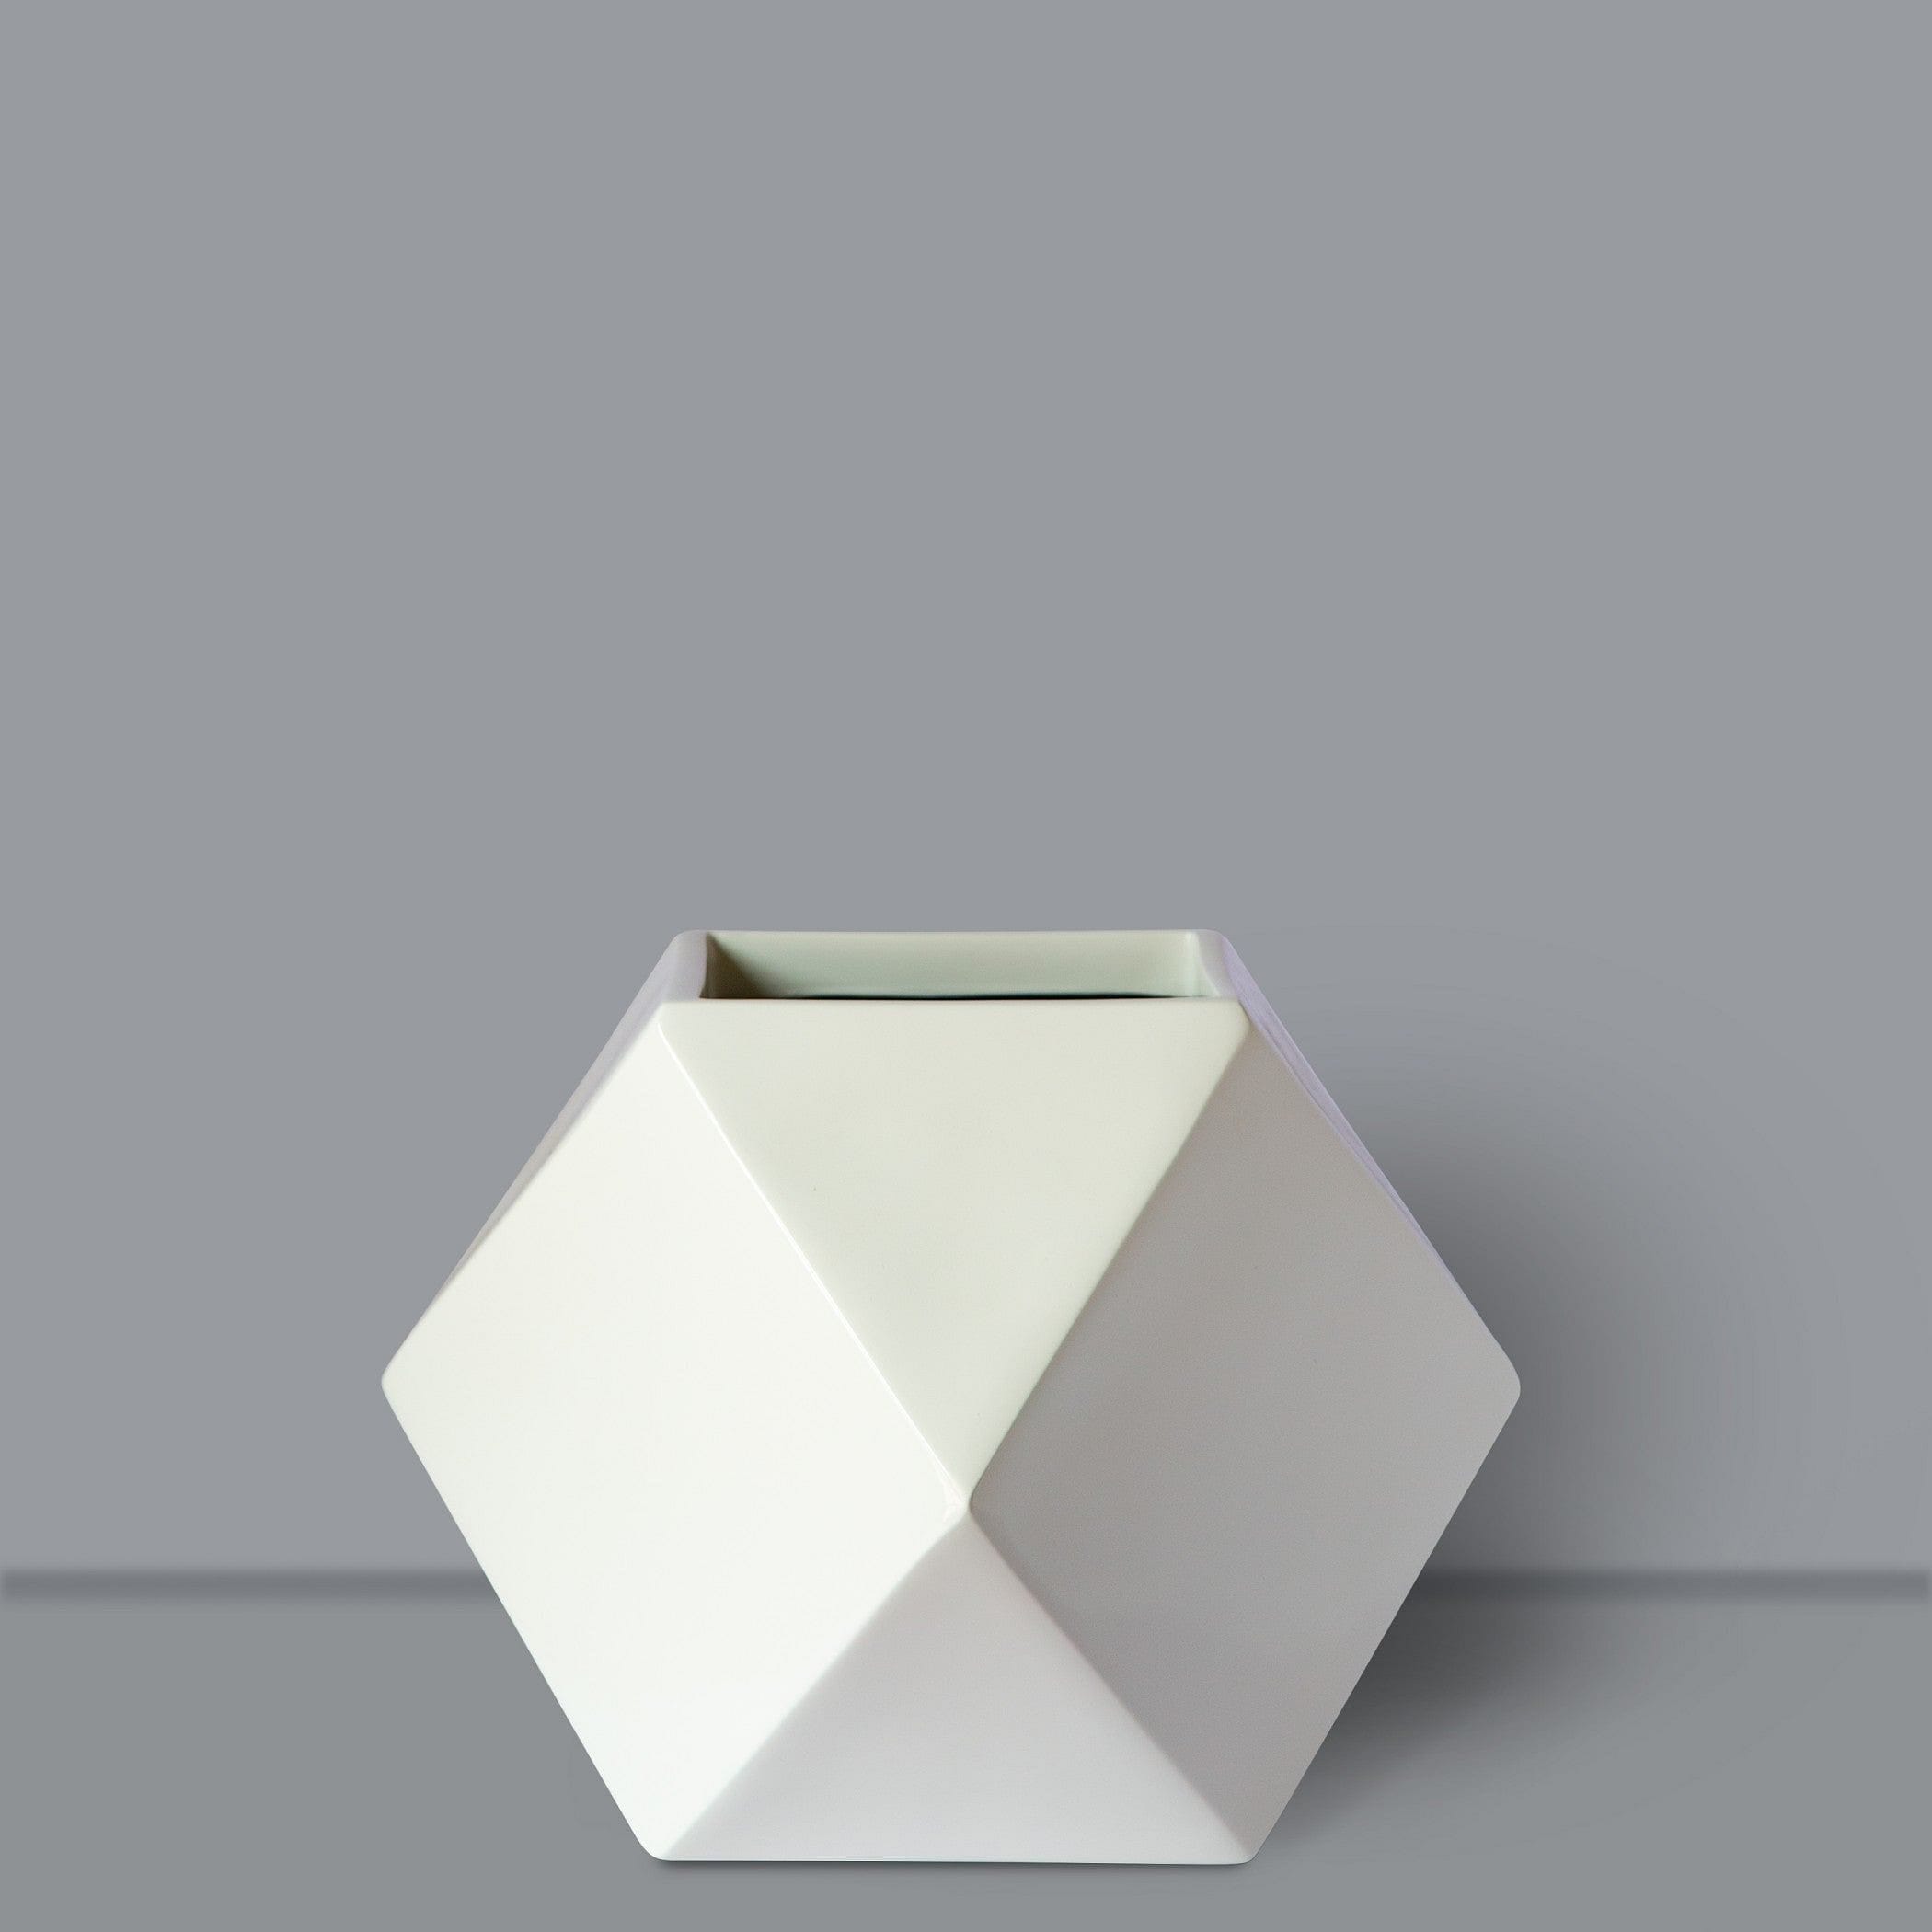 Hexlo FRP Floor Planter  | Available Color White, Black, Green & Grey |